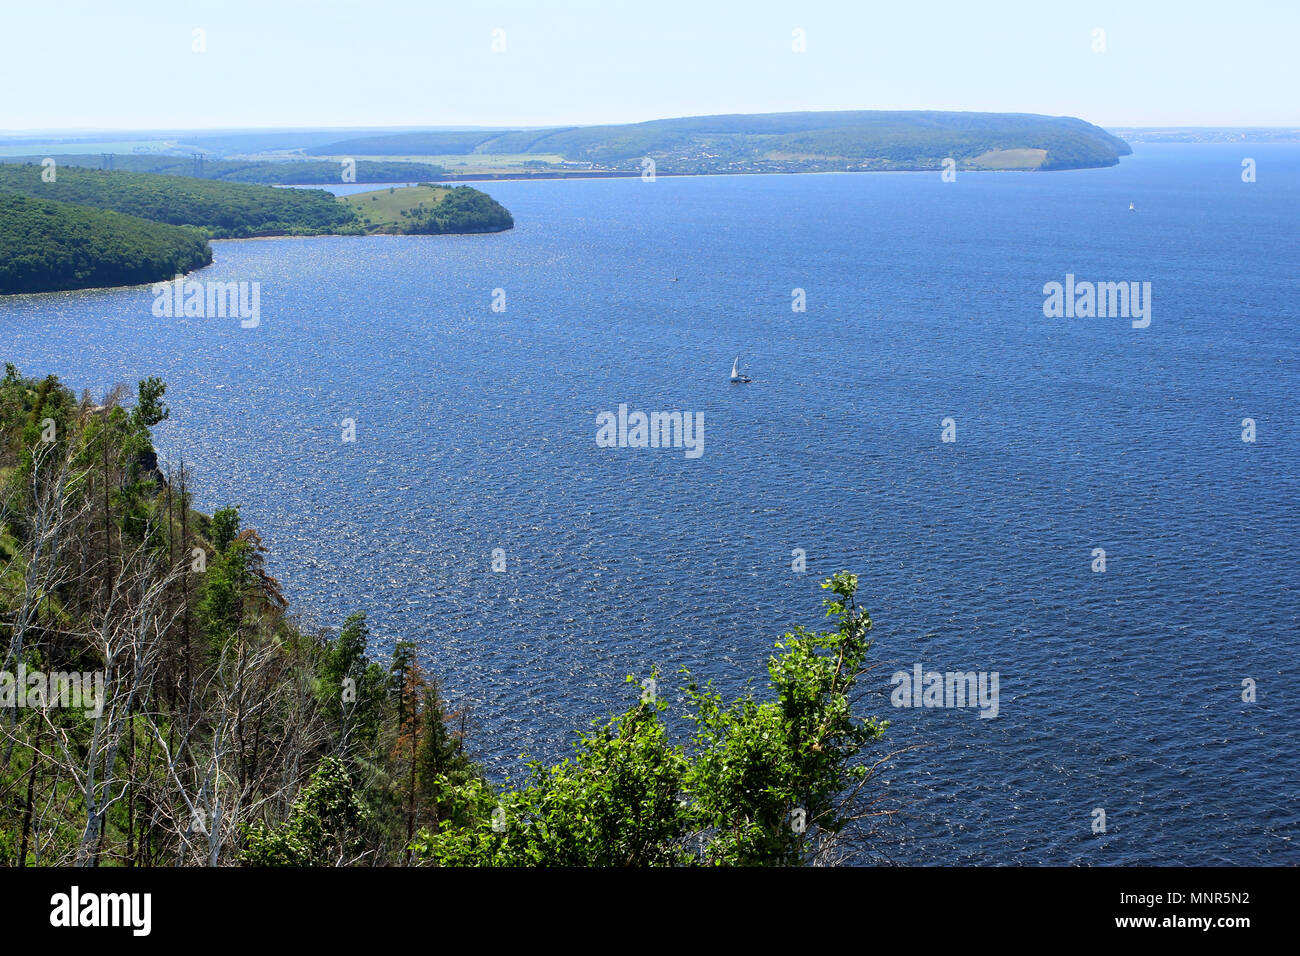 Summer landscape with a view of the Volga River near Samara from height of the bird's flight. Stock Photo